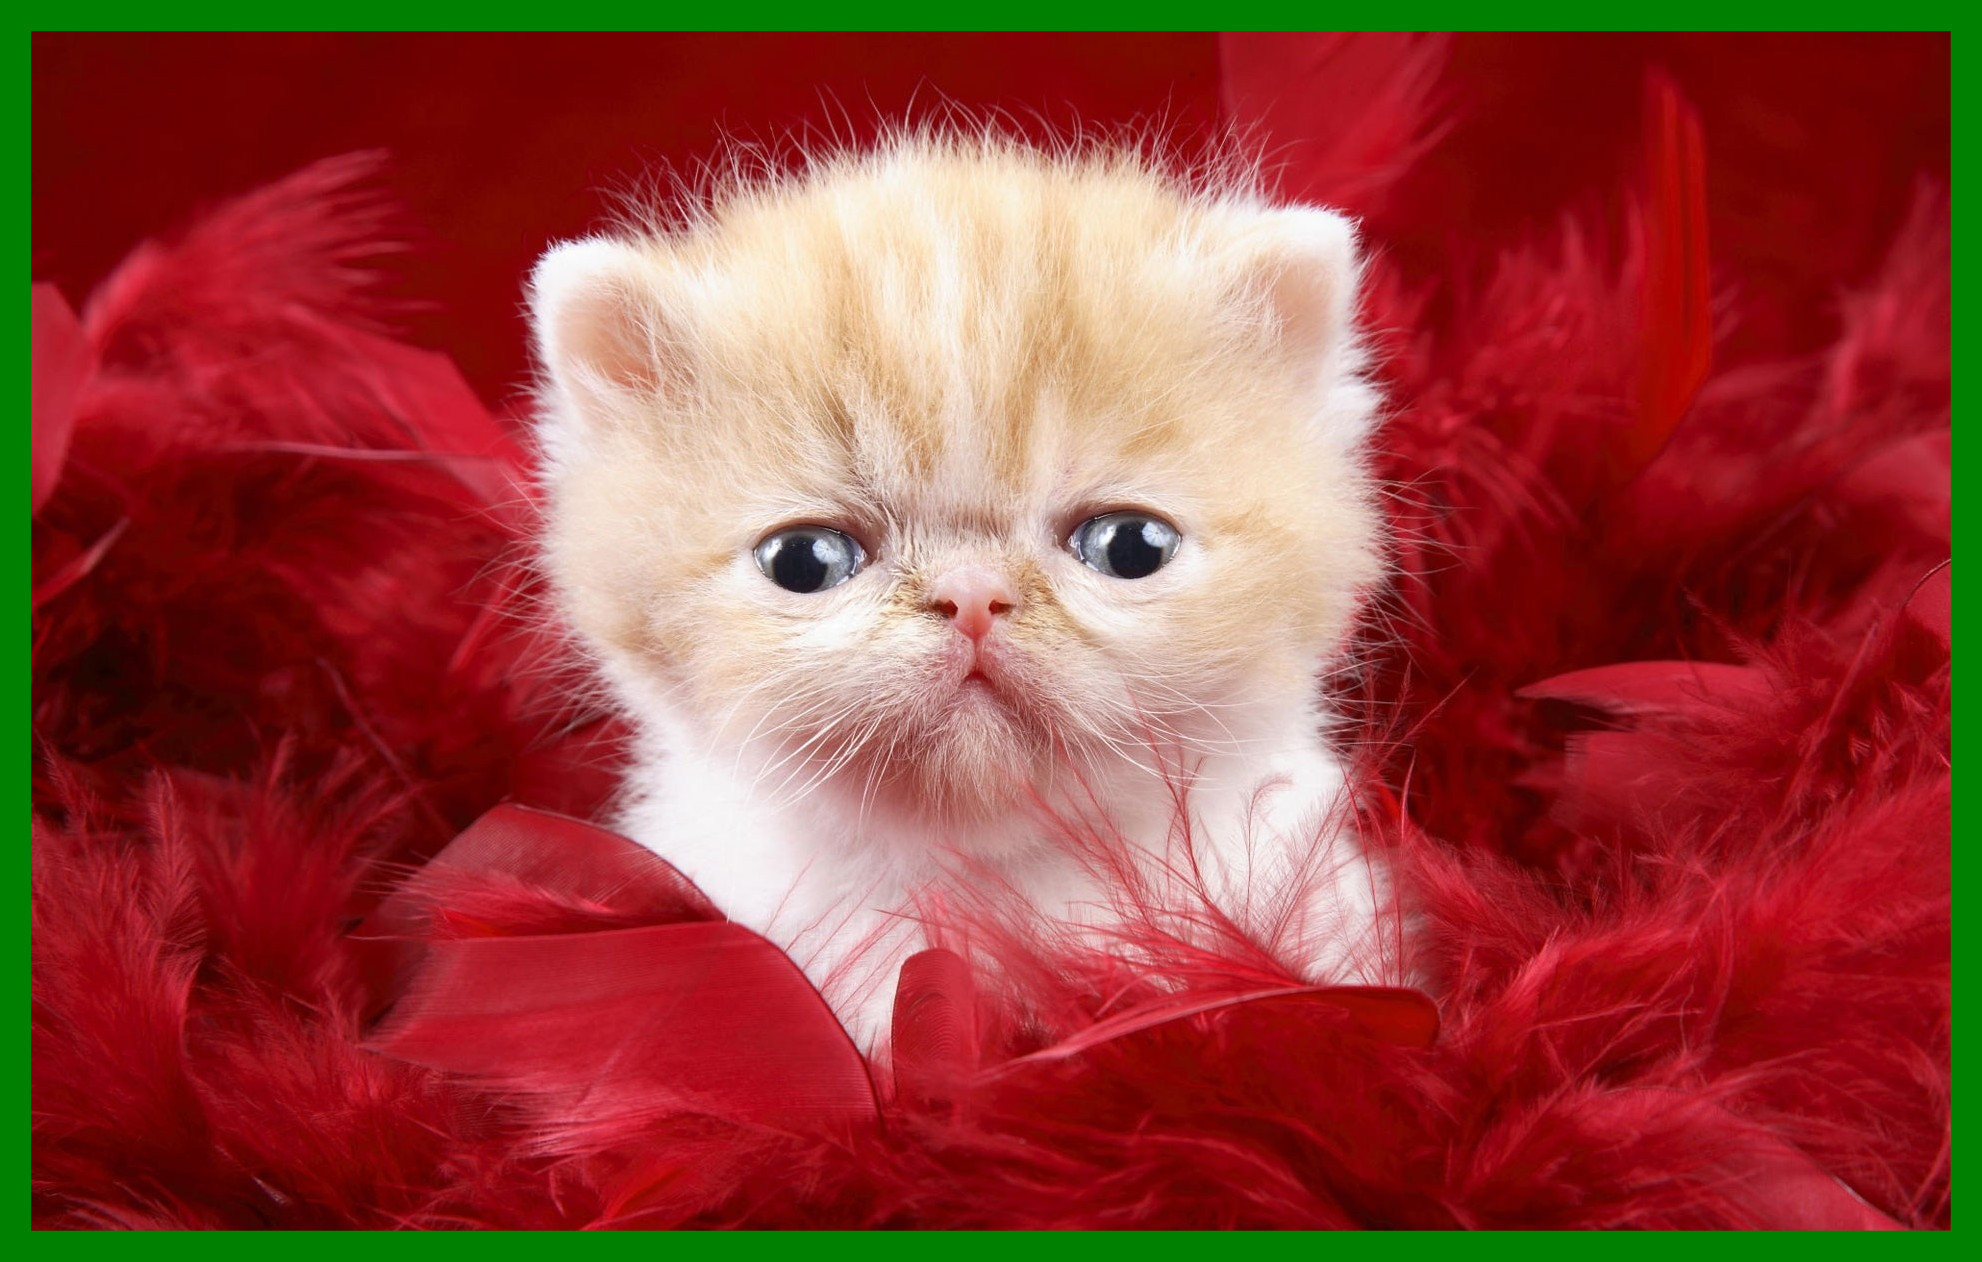 1982x1262 1920x1200 Collection of Christmas Kitten Wallpaper on HDWallpapers